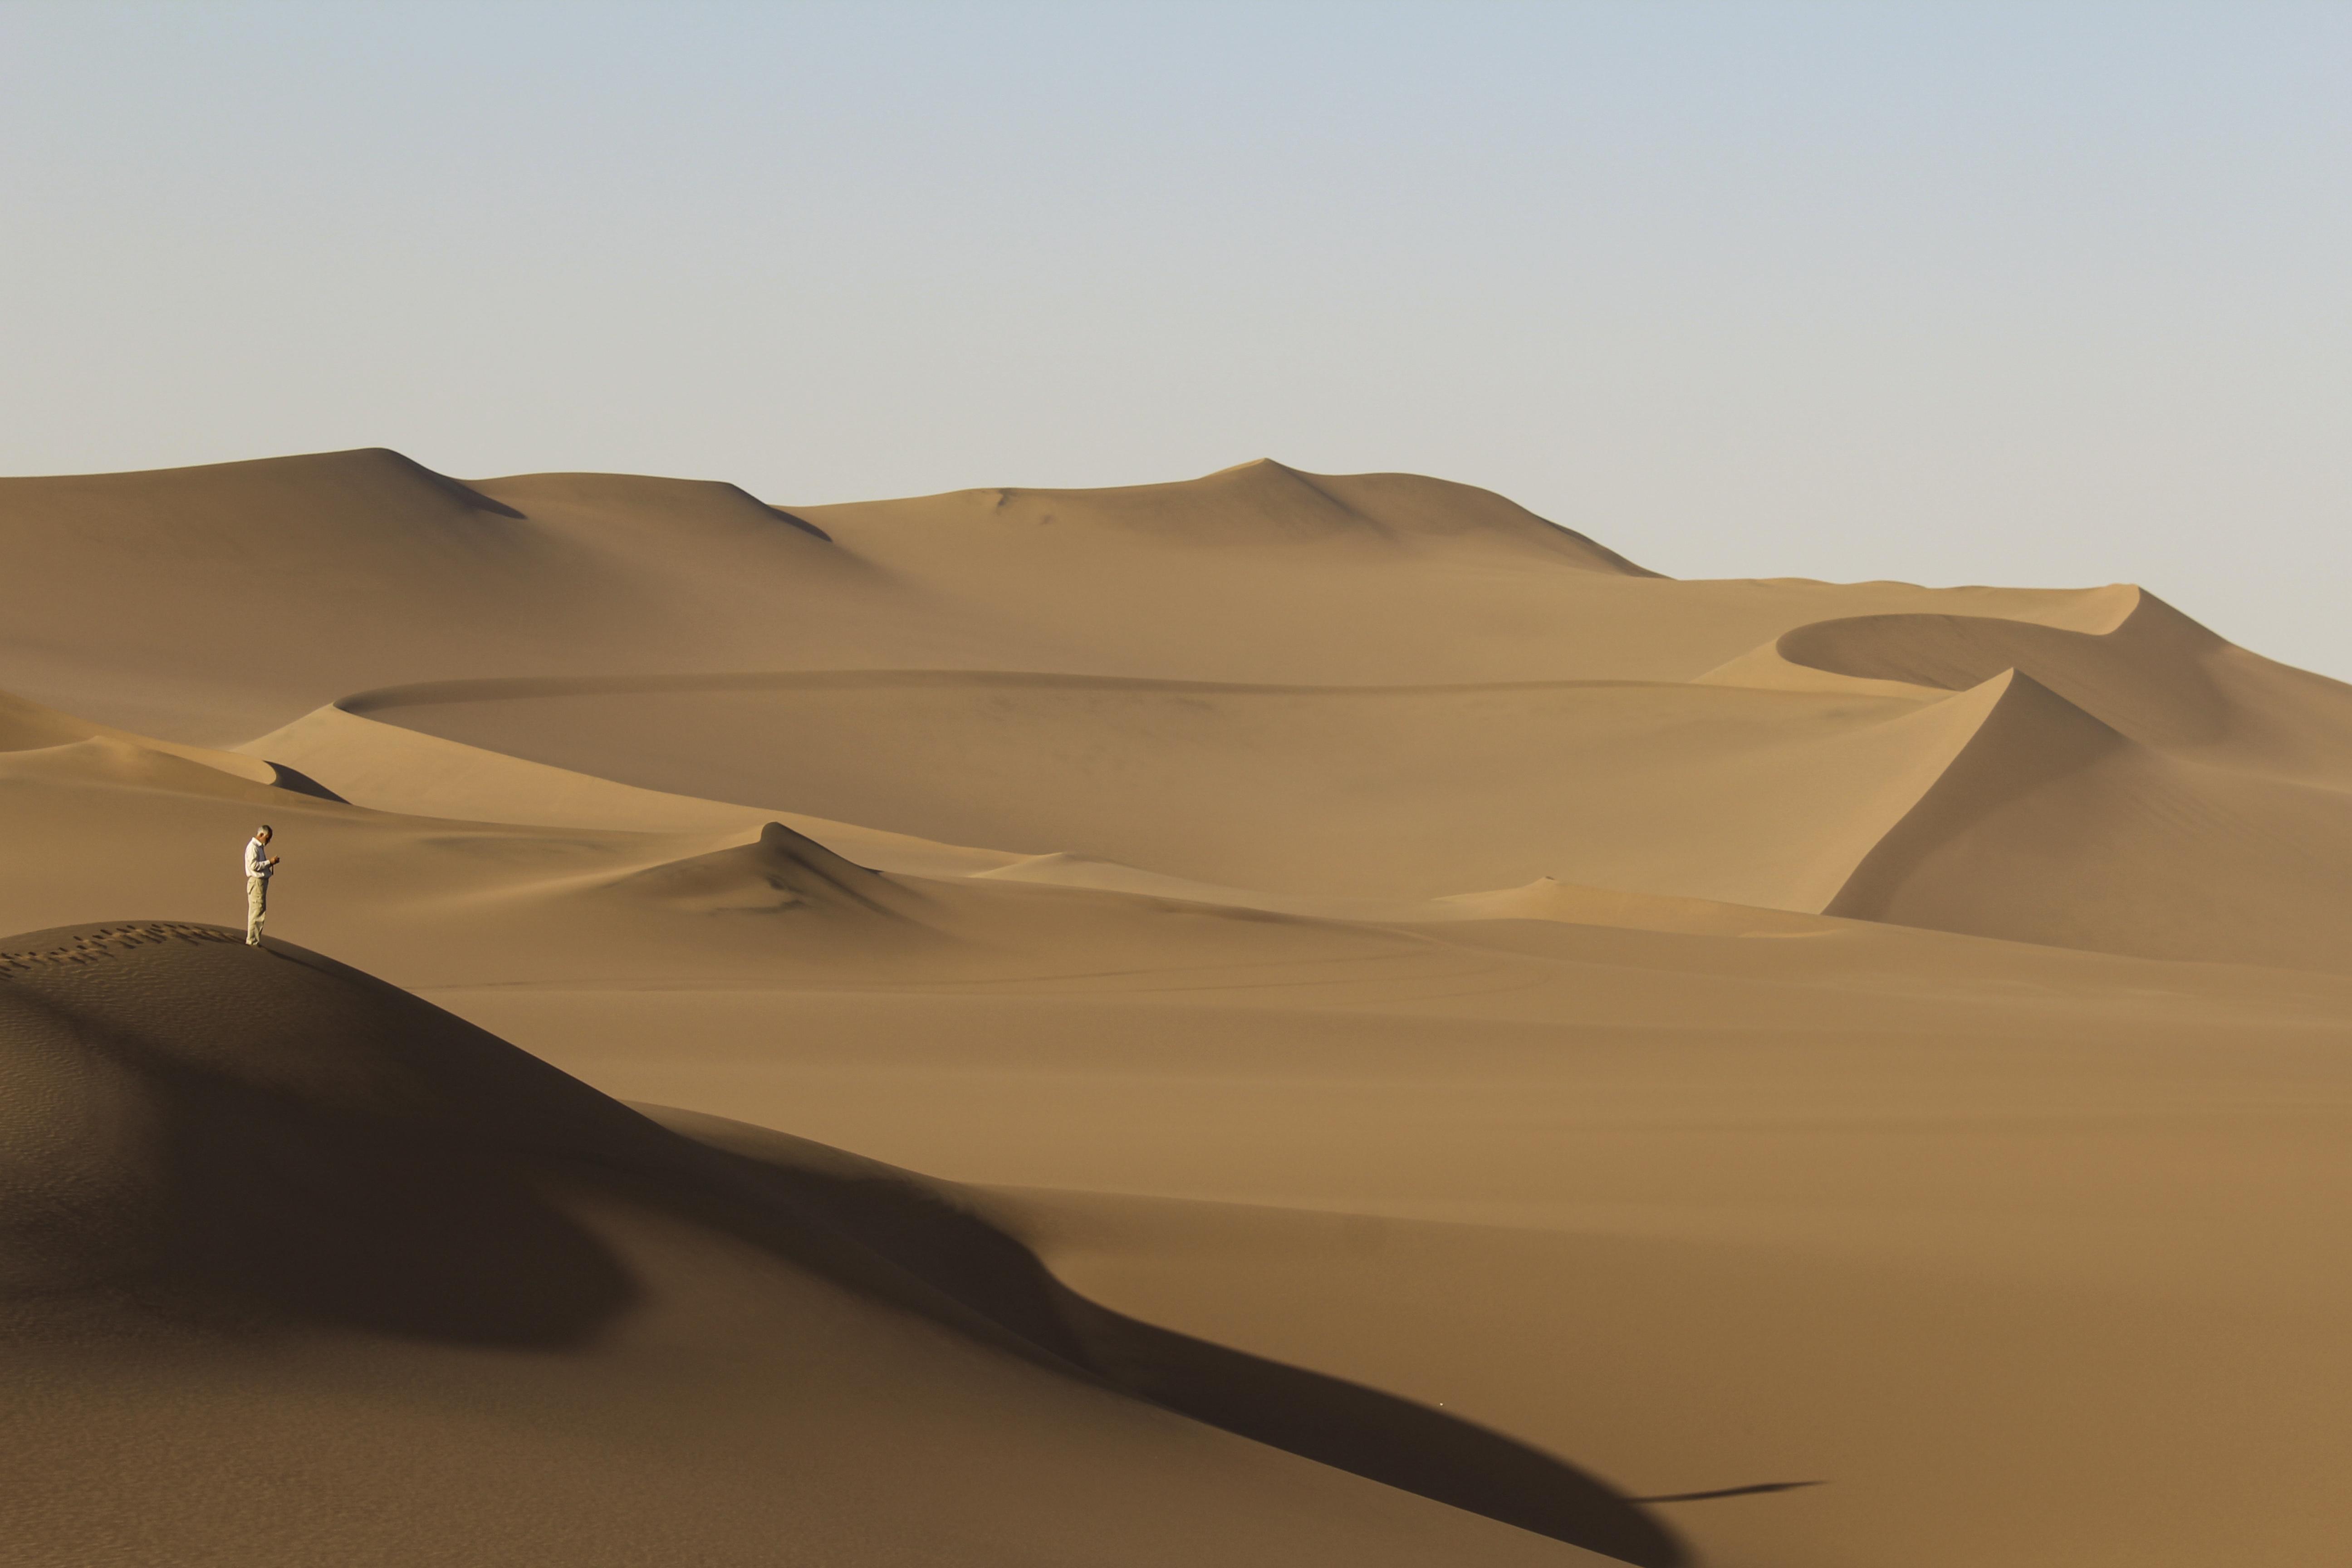 A visitor looks out across the vast expanse of the Lut Desert